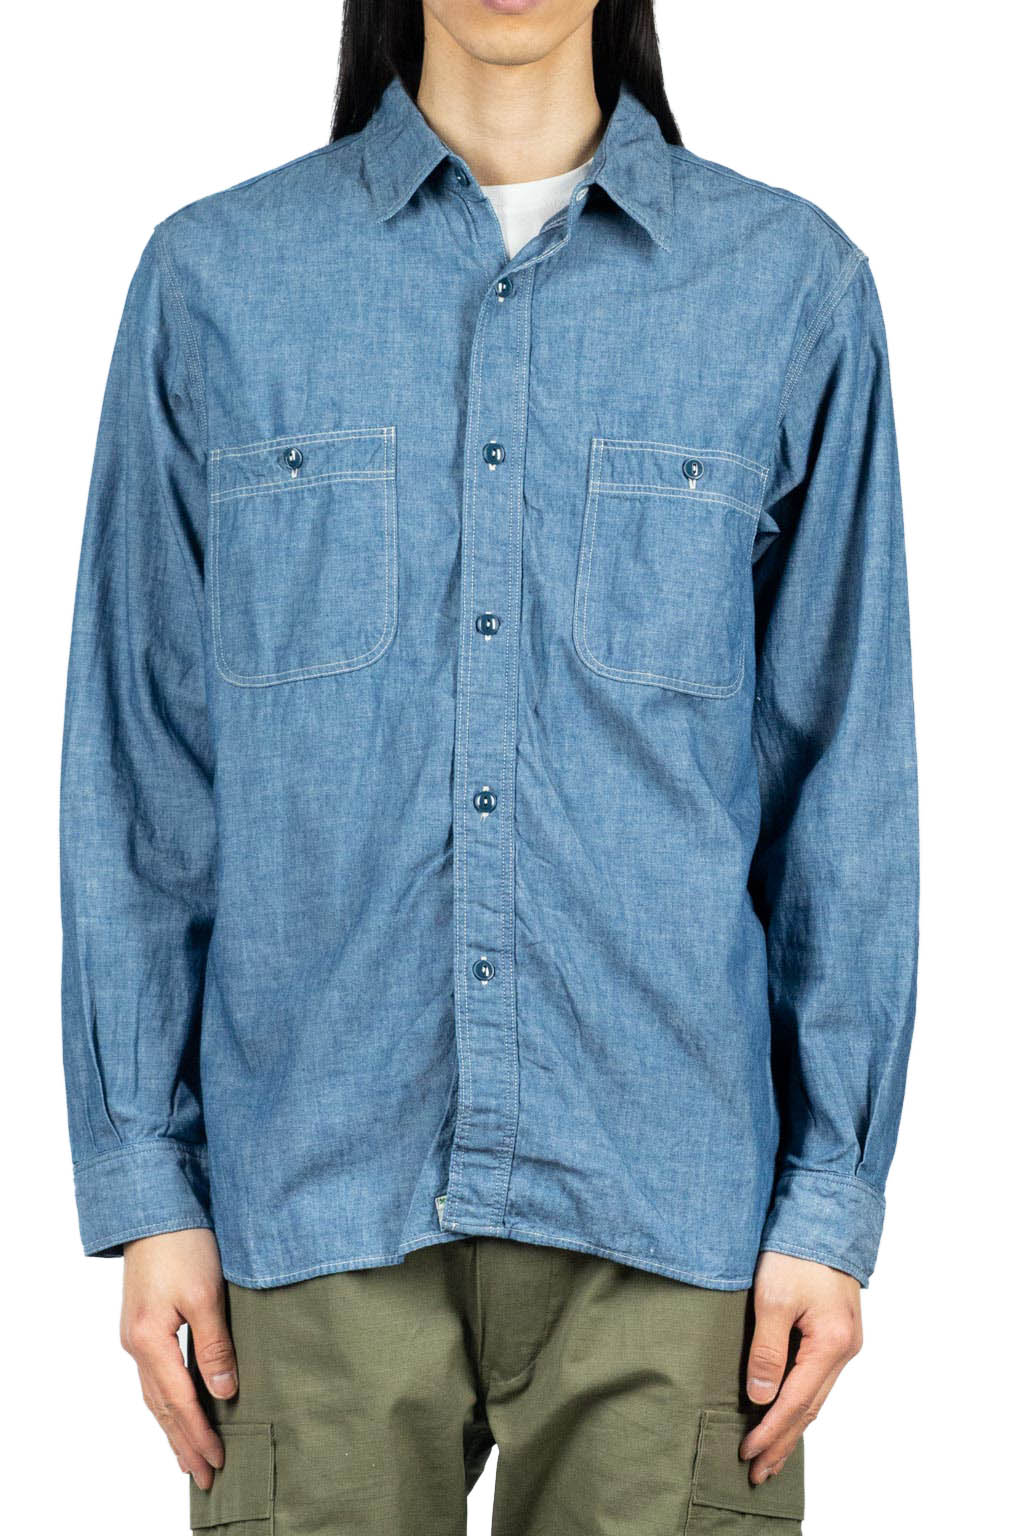 BlueButtonShop - OrSlow - OrSlow-Chambray-Work-Shirt-Blue-01-8070-84